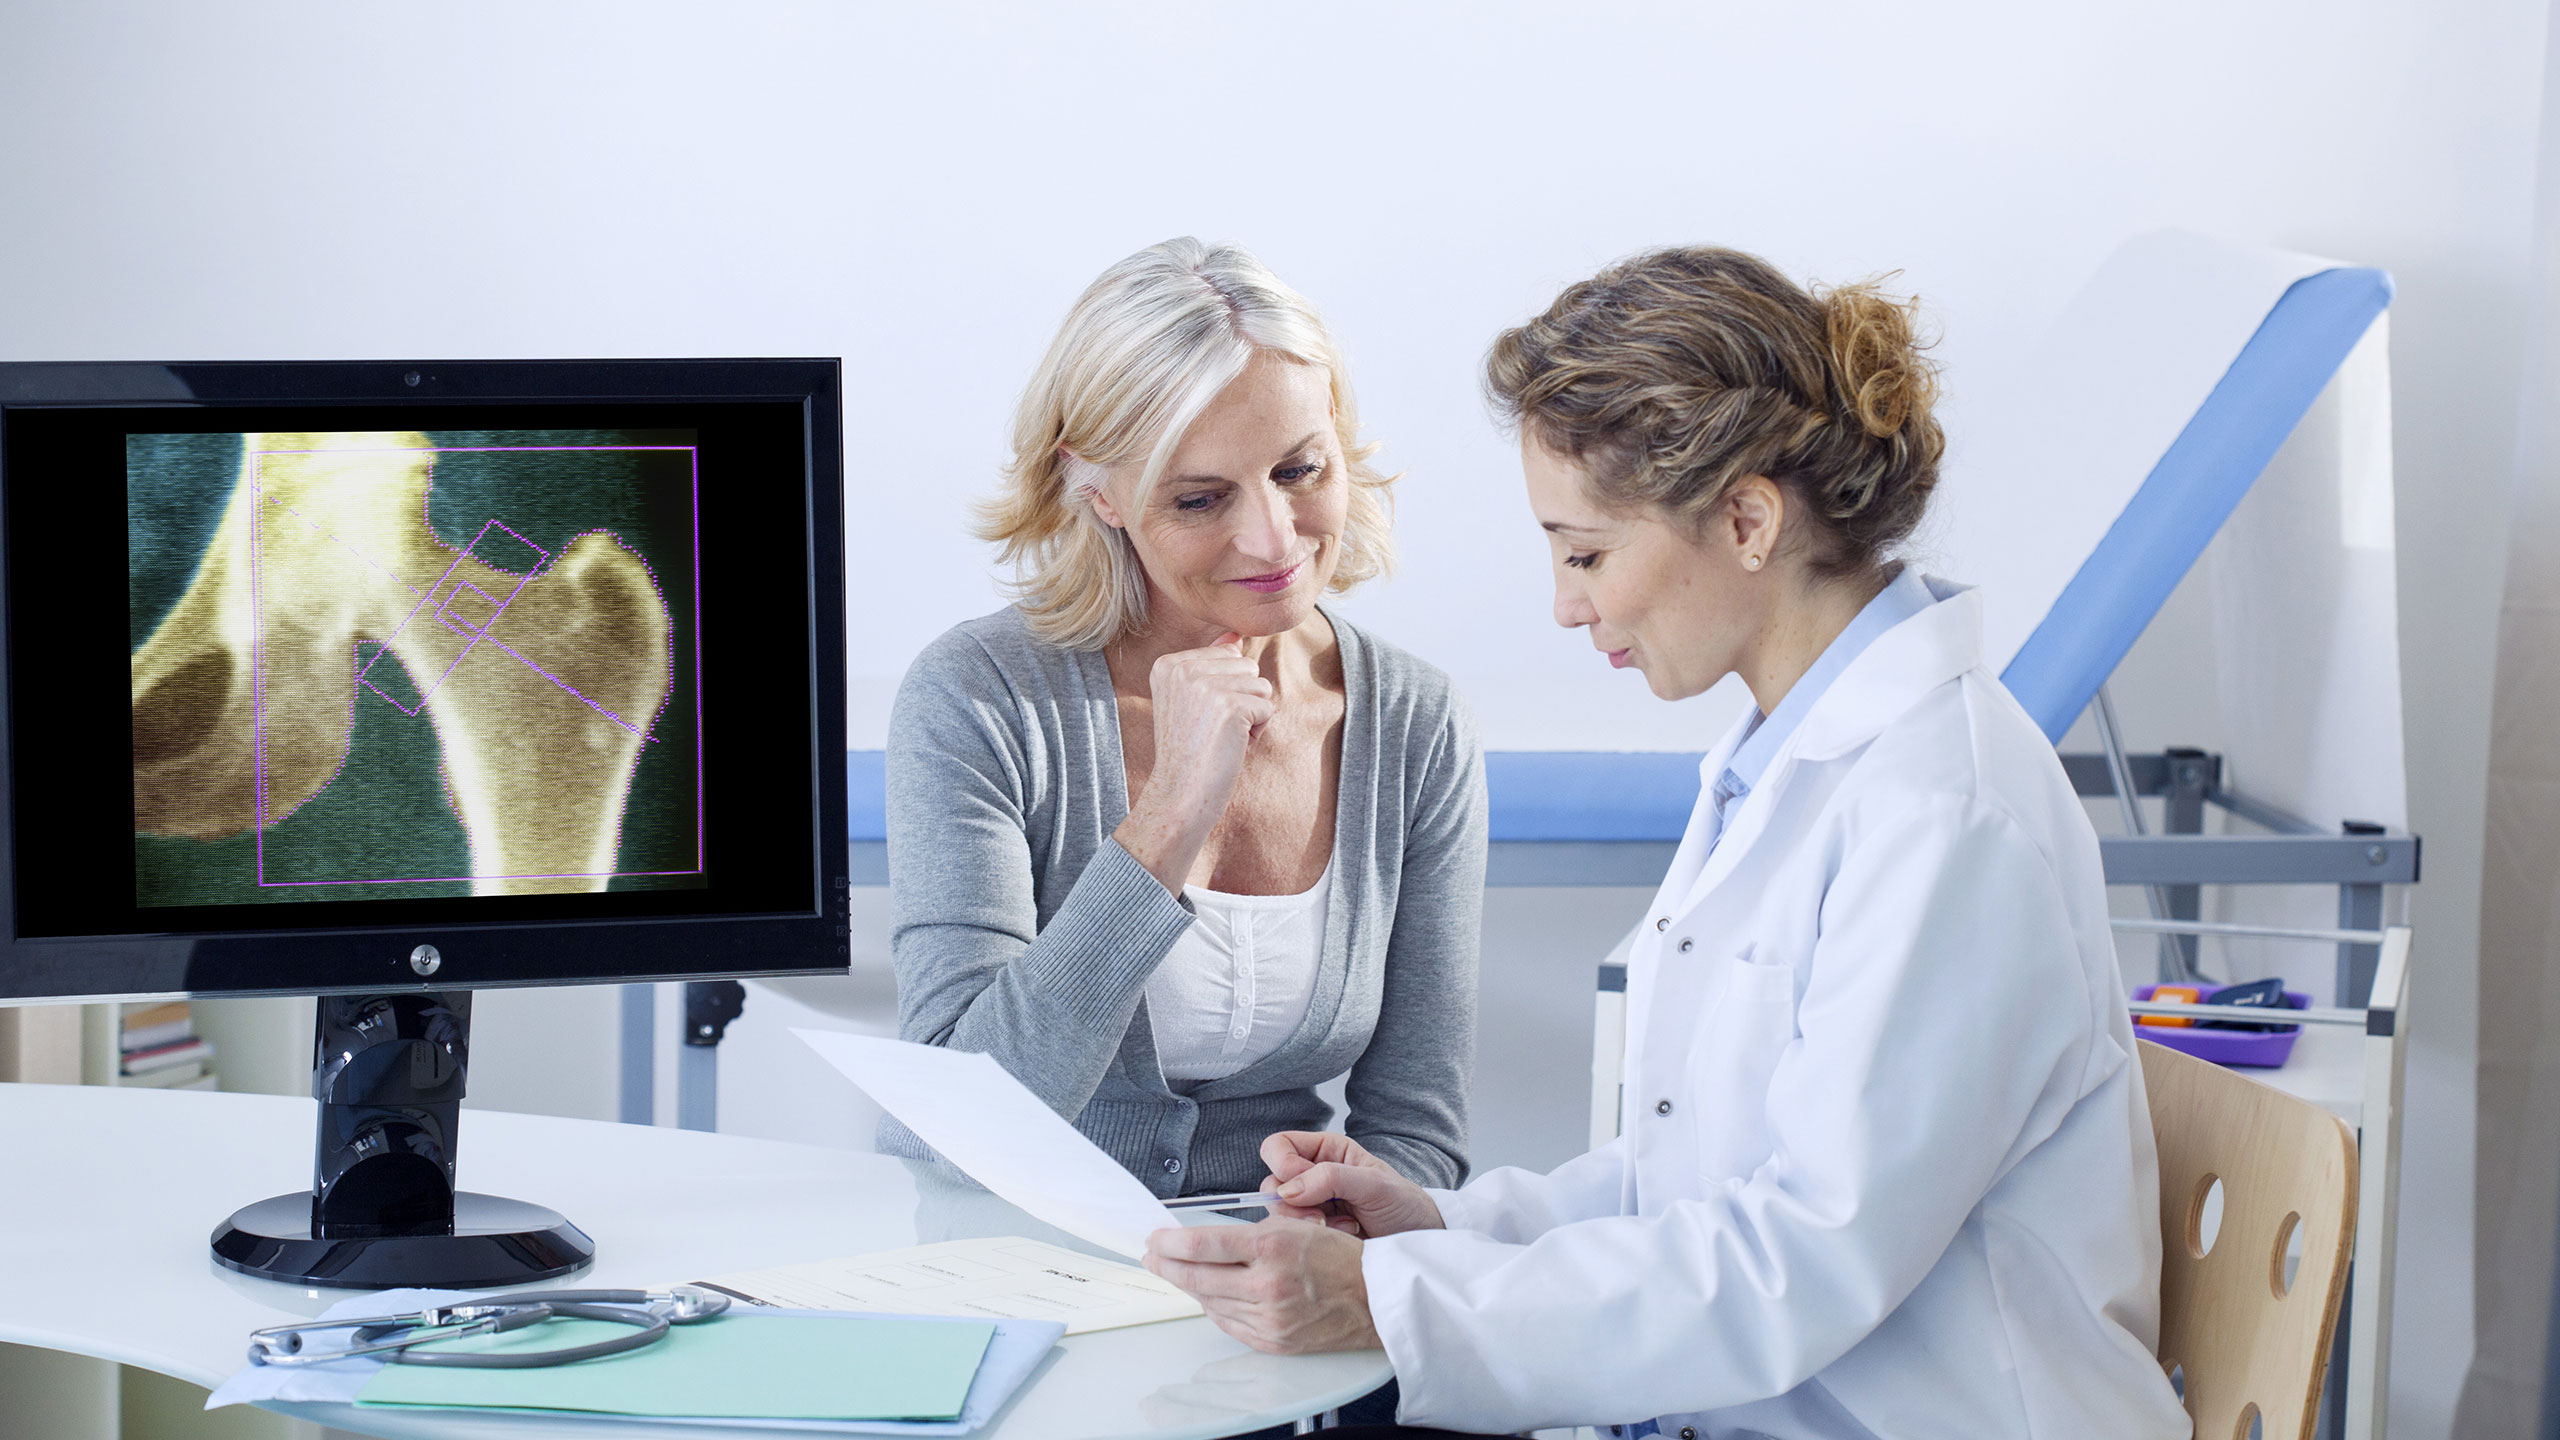 Looking for a bone density test? Don't know what bone density test requirements are, click to learn or contact our clinic